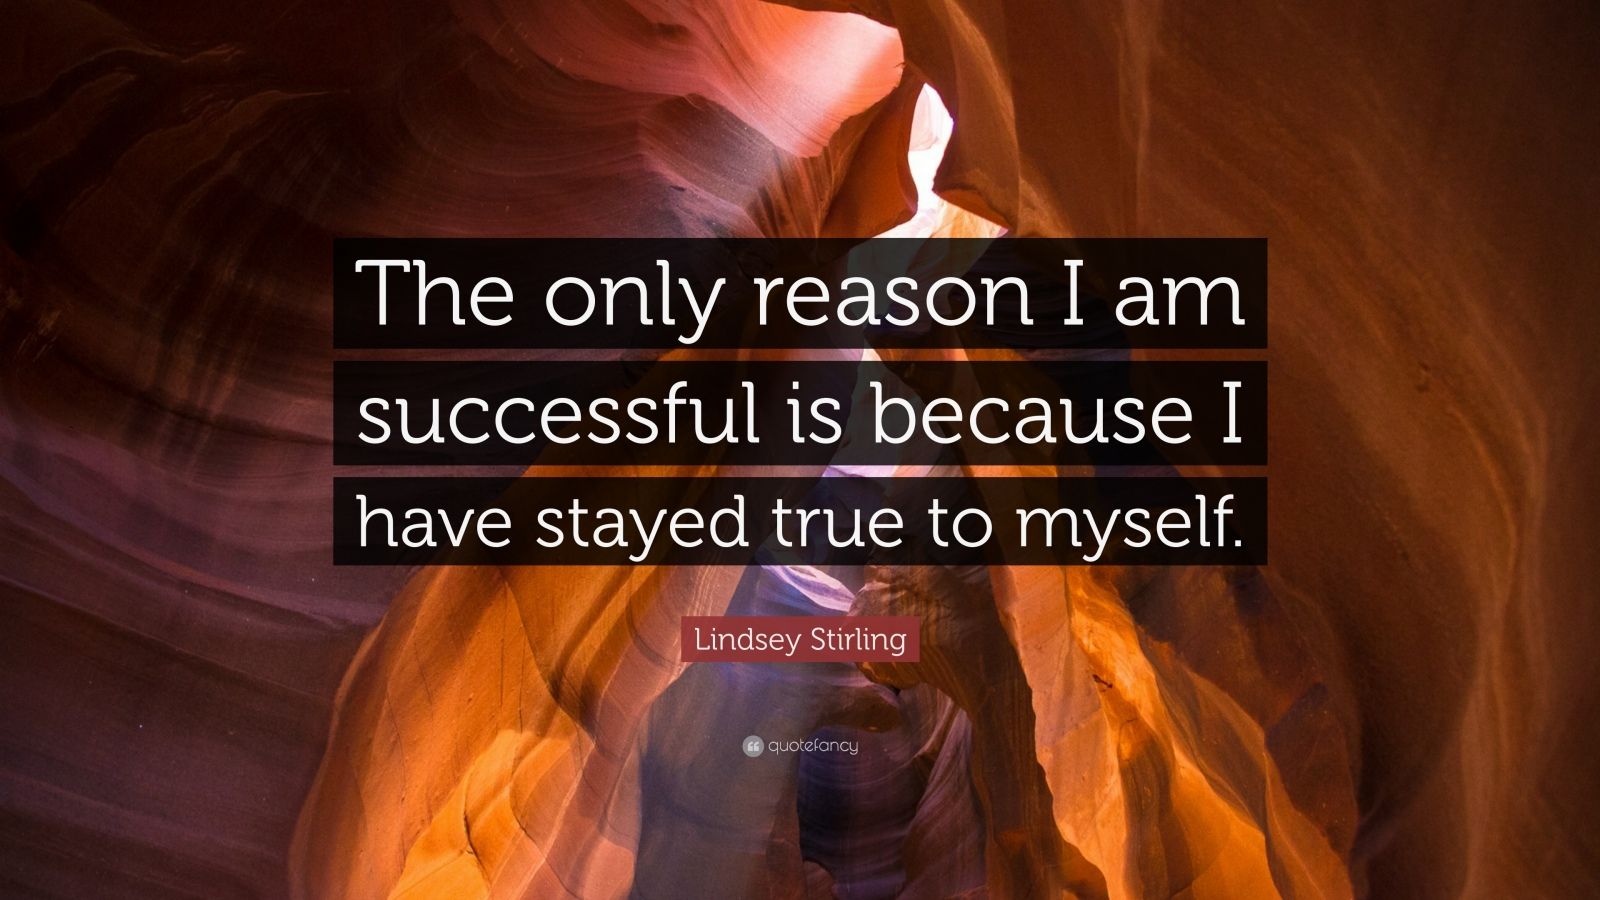 Lindsey Stirling Quote: "The only reason I am successful is because I have stayed true to myself ...